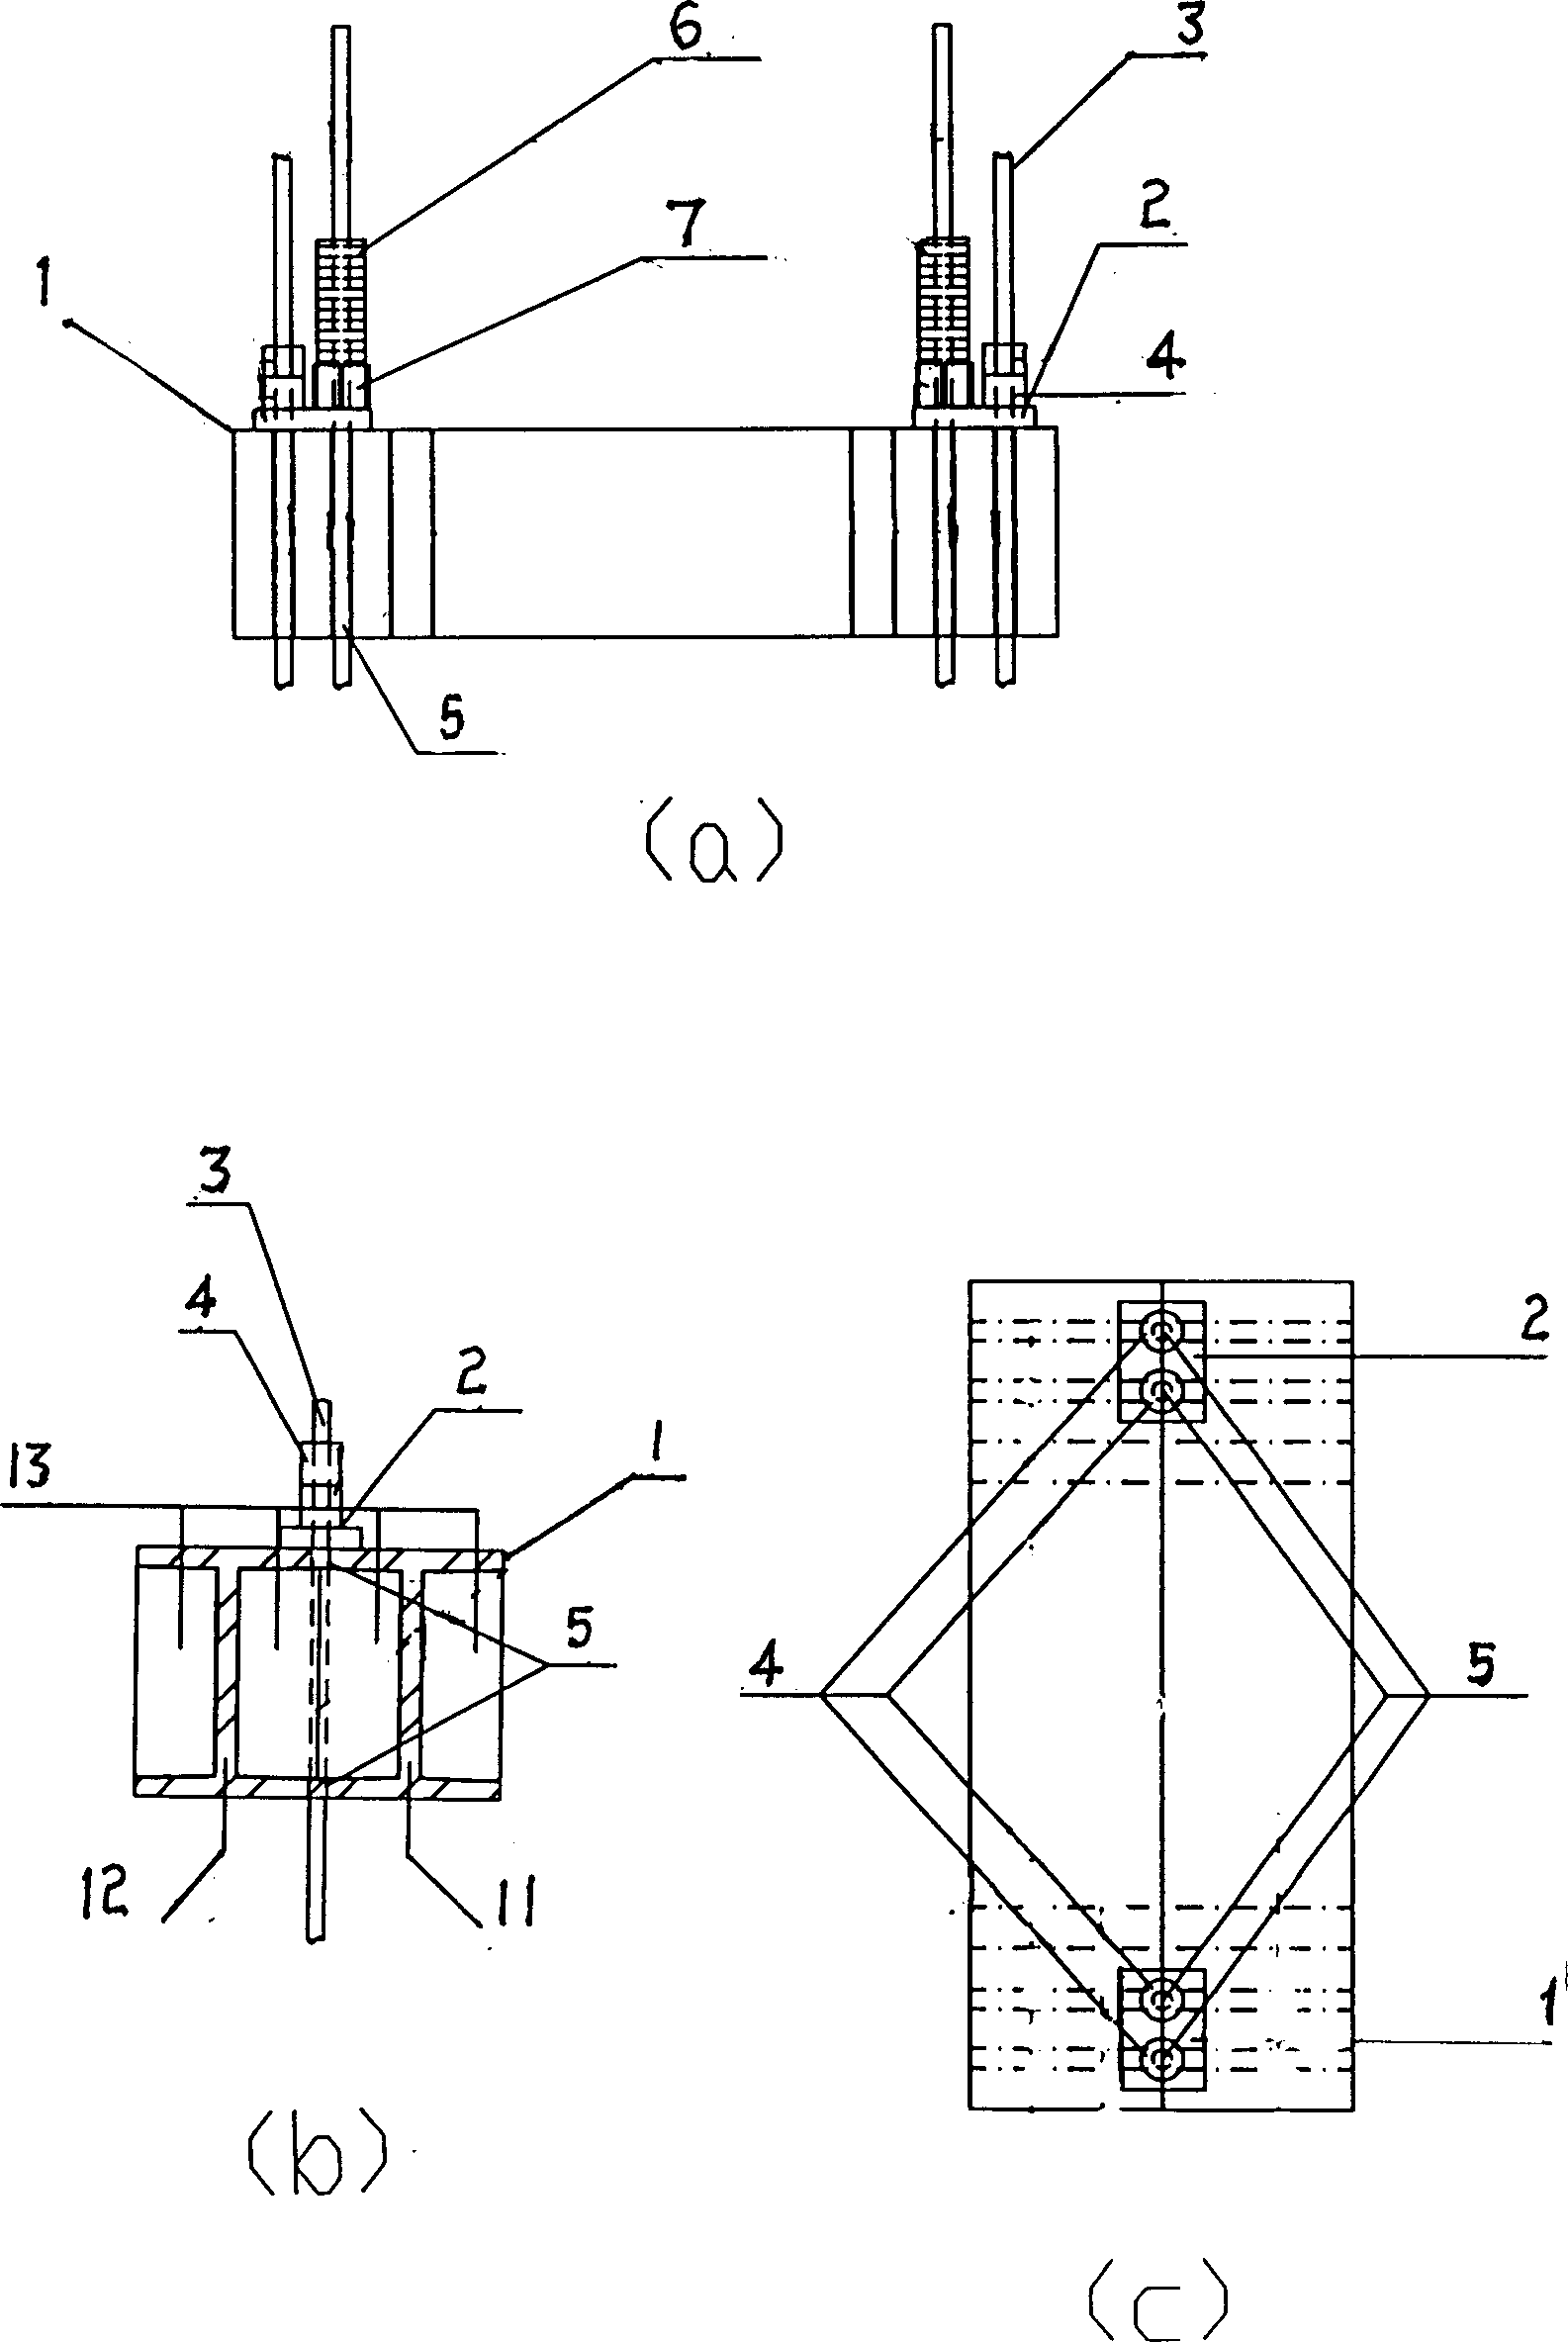 Method for dynamic control of nondestructive replacement of tied arch bridge hanger rod